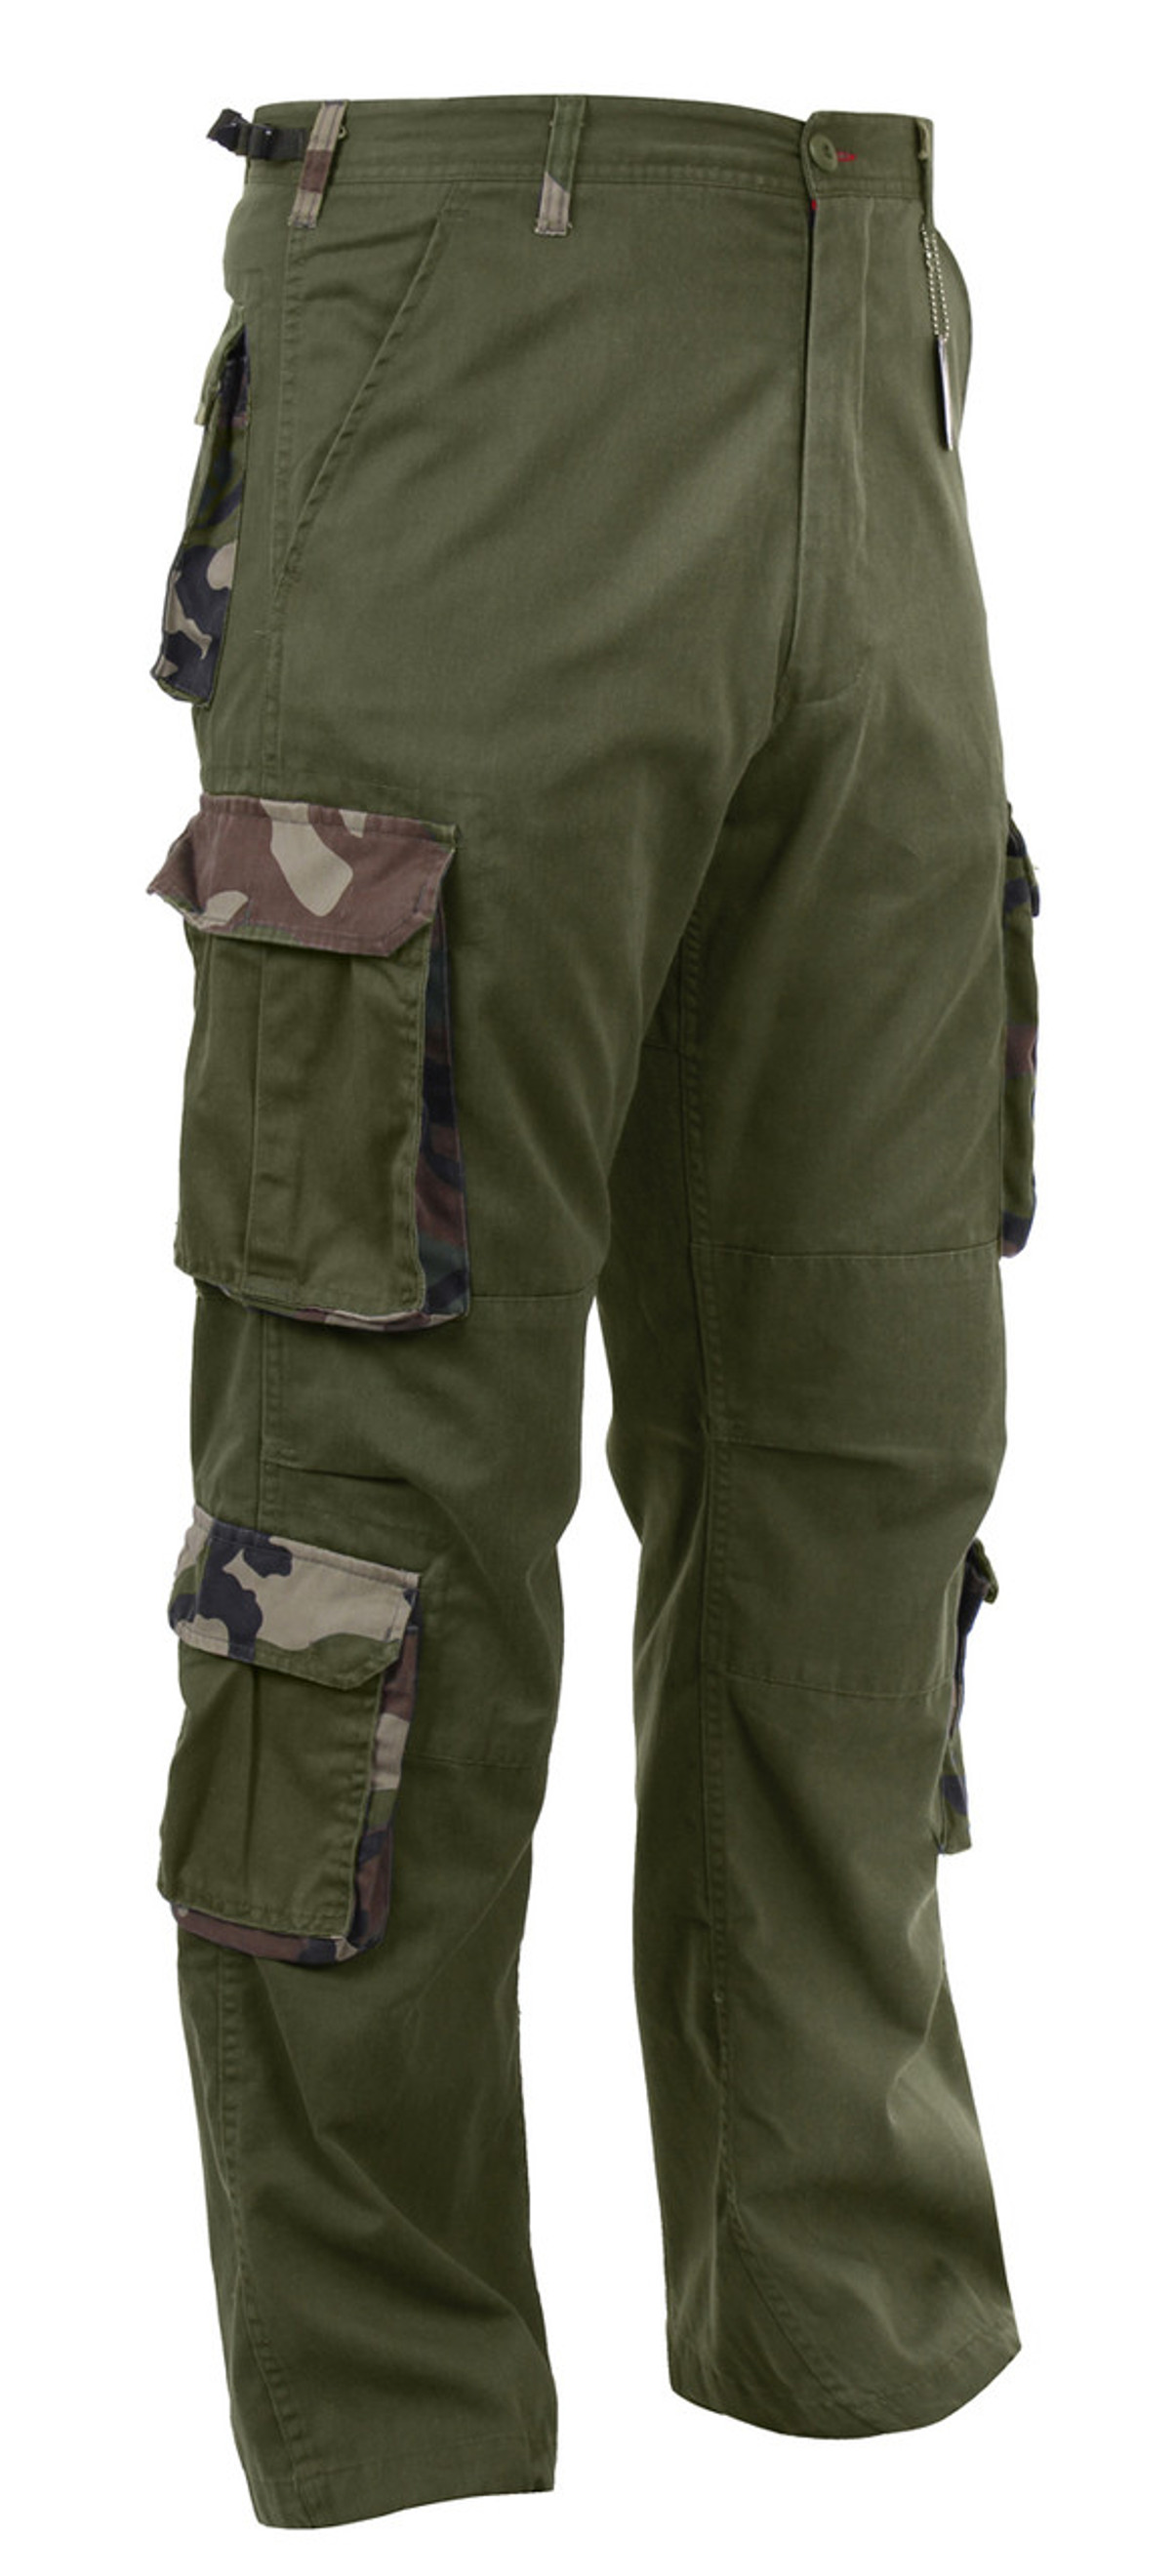 Rothco Vintage Camo Paratrooper Fatigue Pants - Olive Drab With Woodla – PX  Supply, LLC